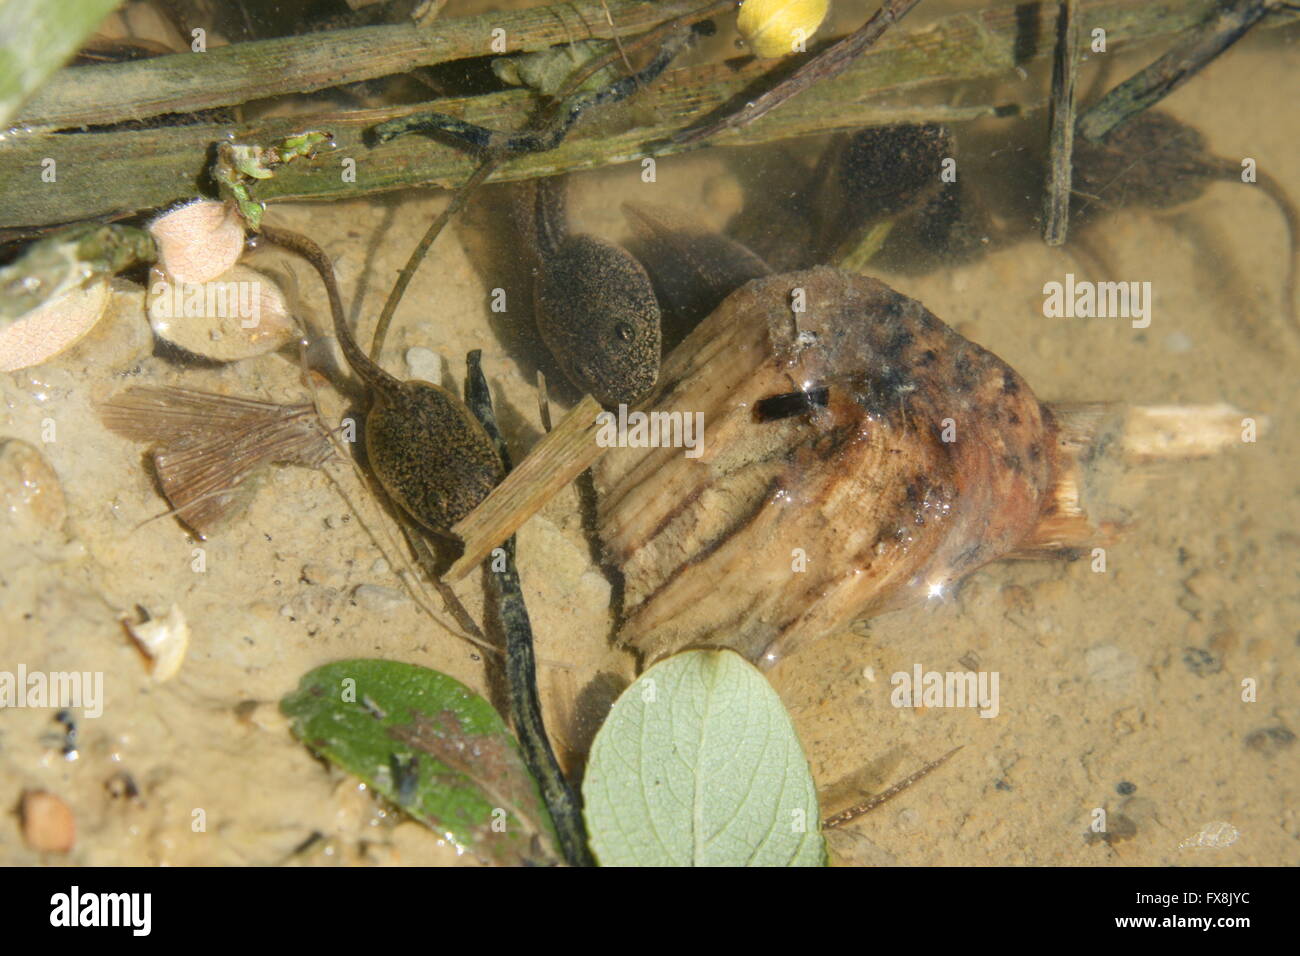 Two tadpoles looking for food Stock Photo